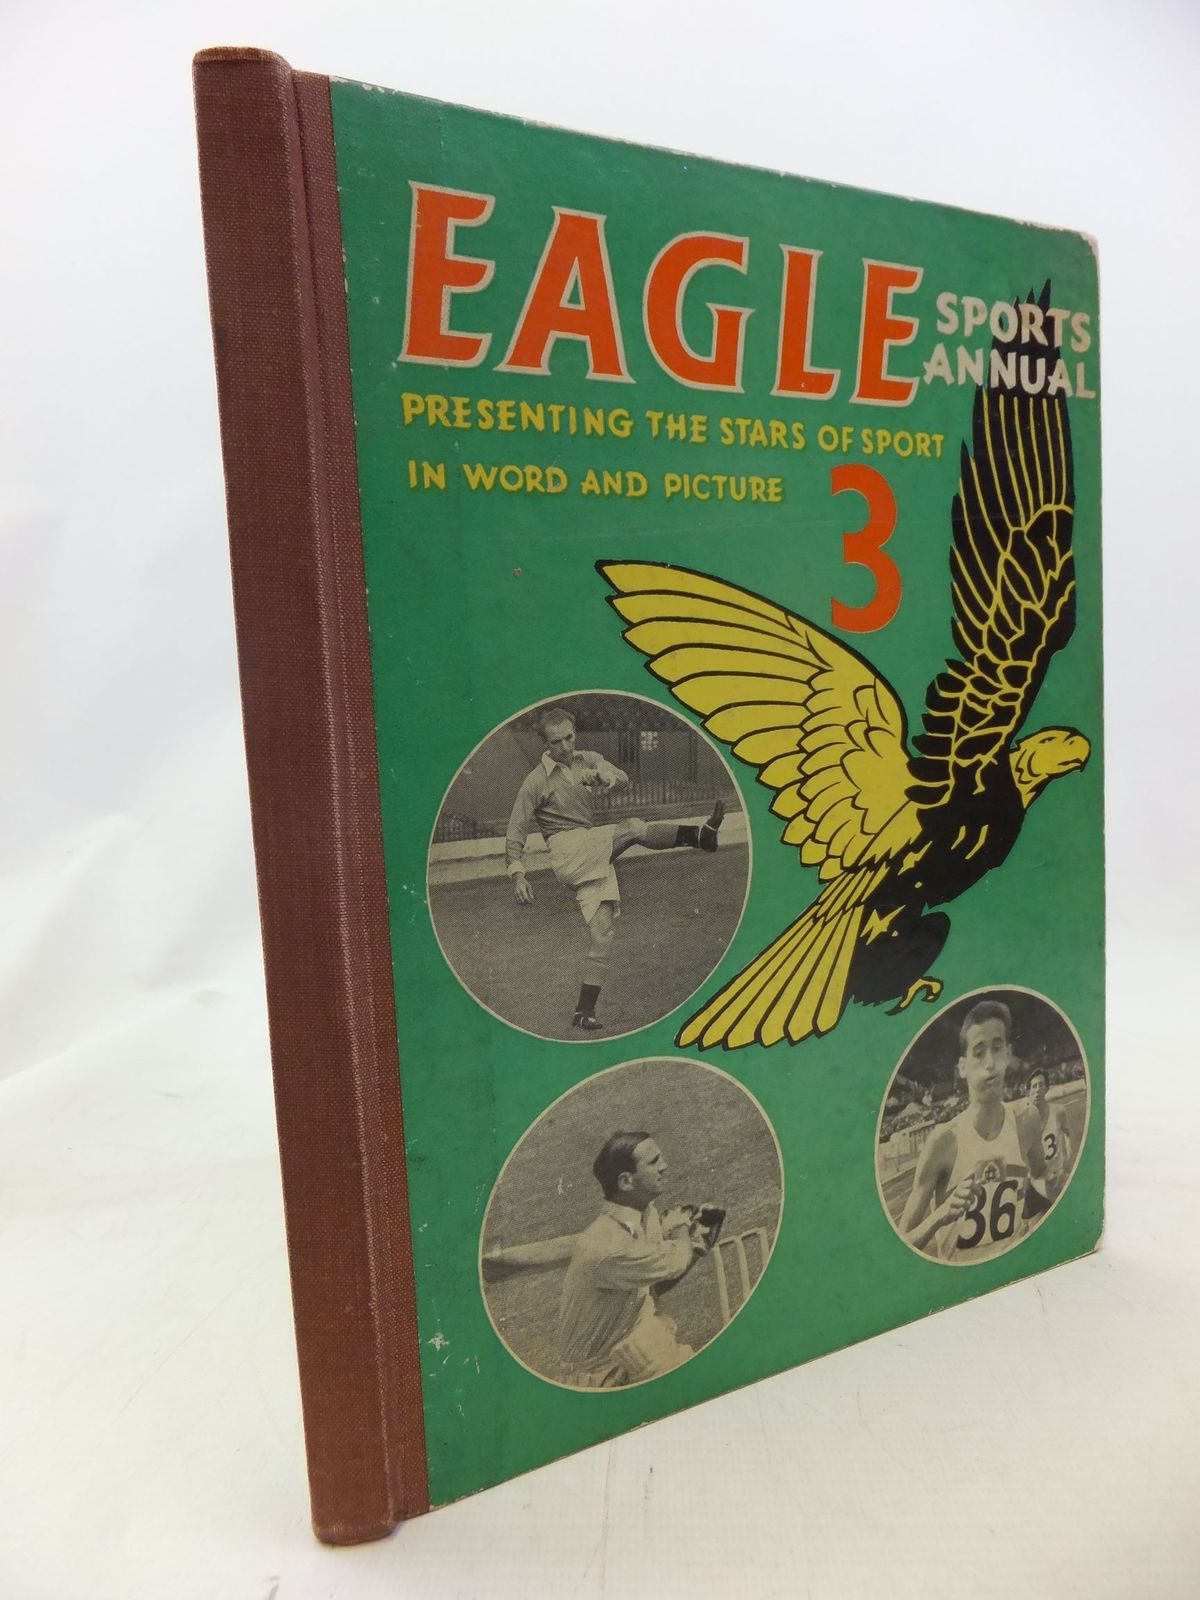 Photo of THE THIRD EAGLE SPORTS ANNUAL written by Morris, Marcus illustrated by White, Brian published by Hulton Press Ltd. (STOCK CODE: 1711417)  for sale by Stella & Rose's Books